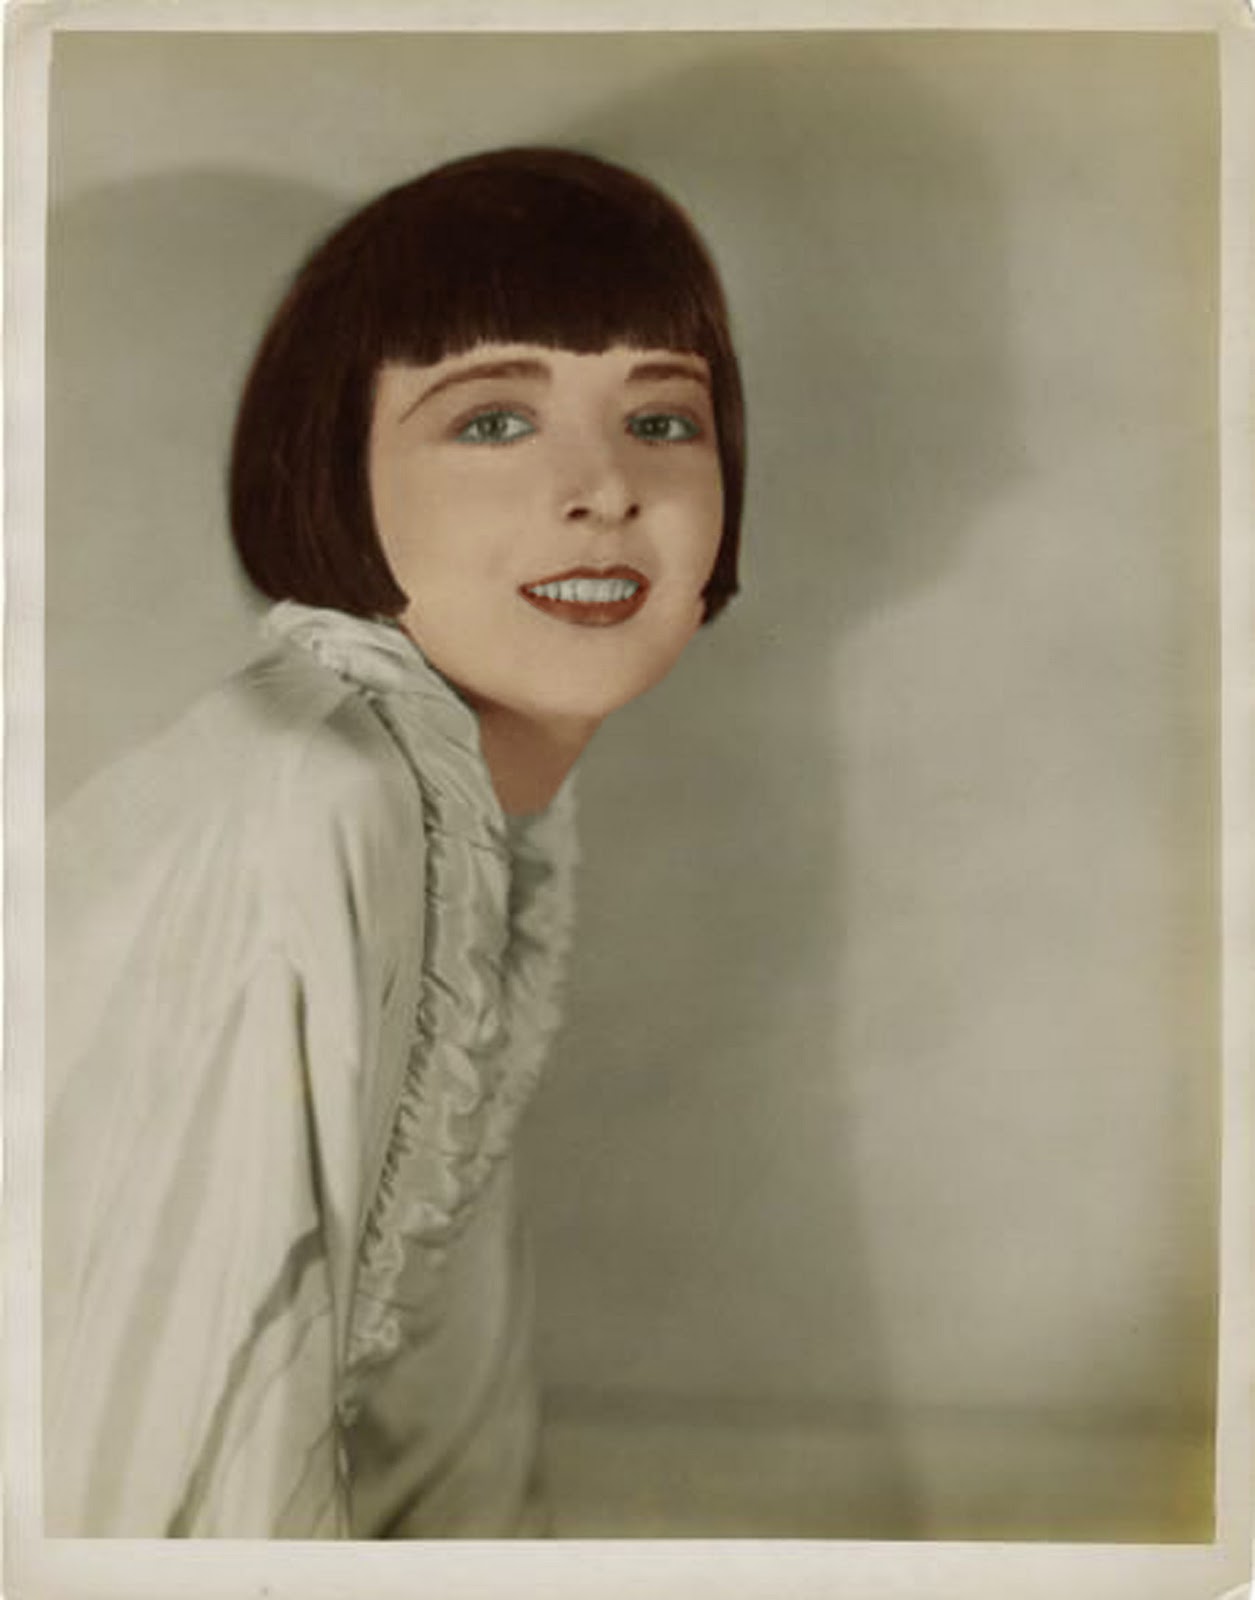 Short Curly Hairstyles For Black Women With Round Faces Colleen Moore - The Bob -1920's Hairstyle - fashionsonic